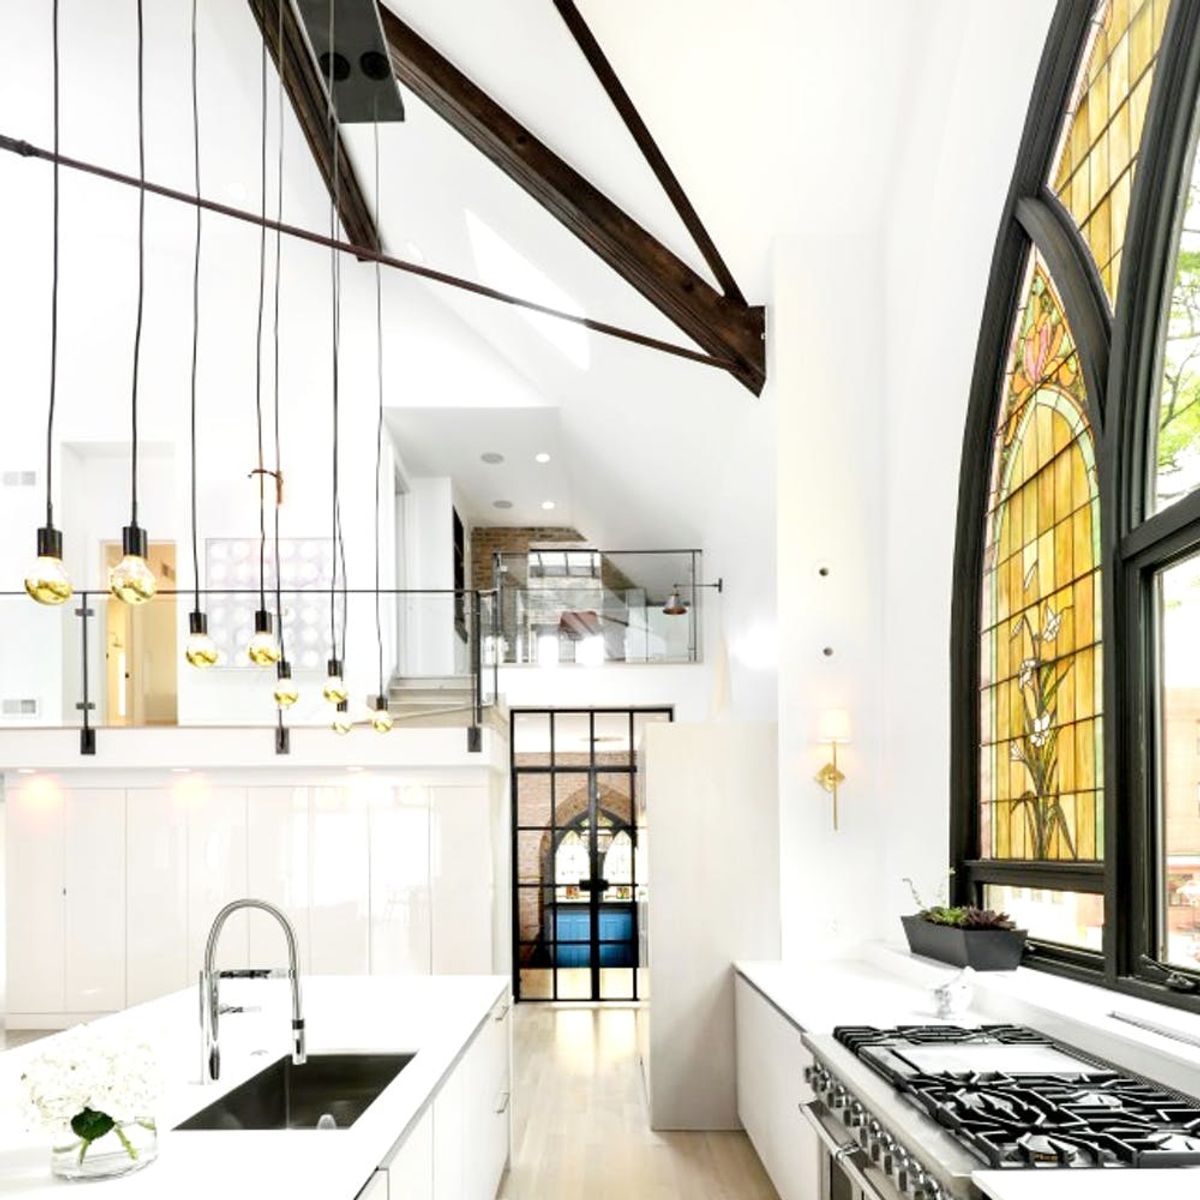 13 Stunning Homes That Used to Be Churches